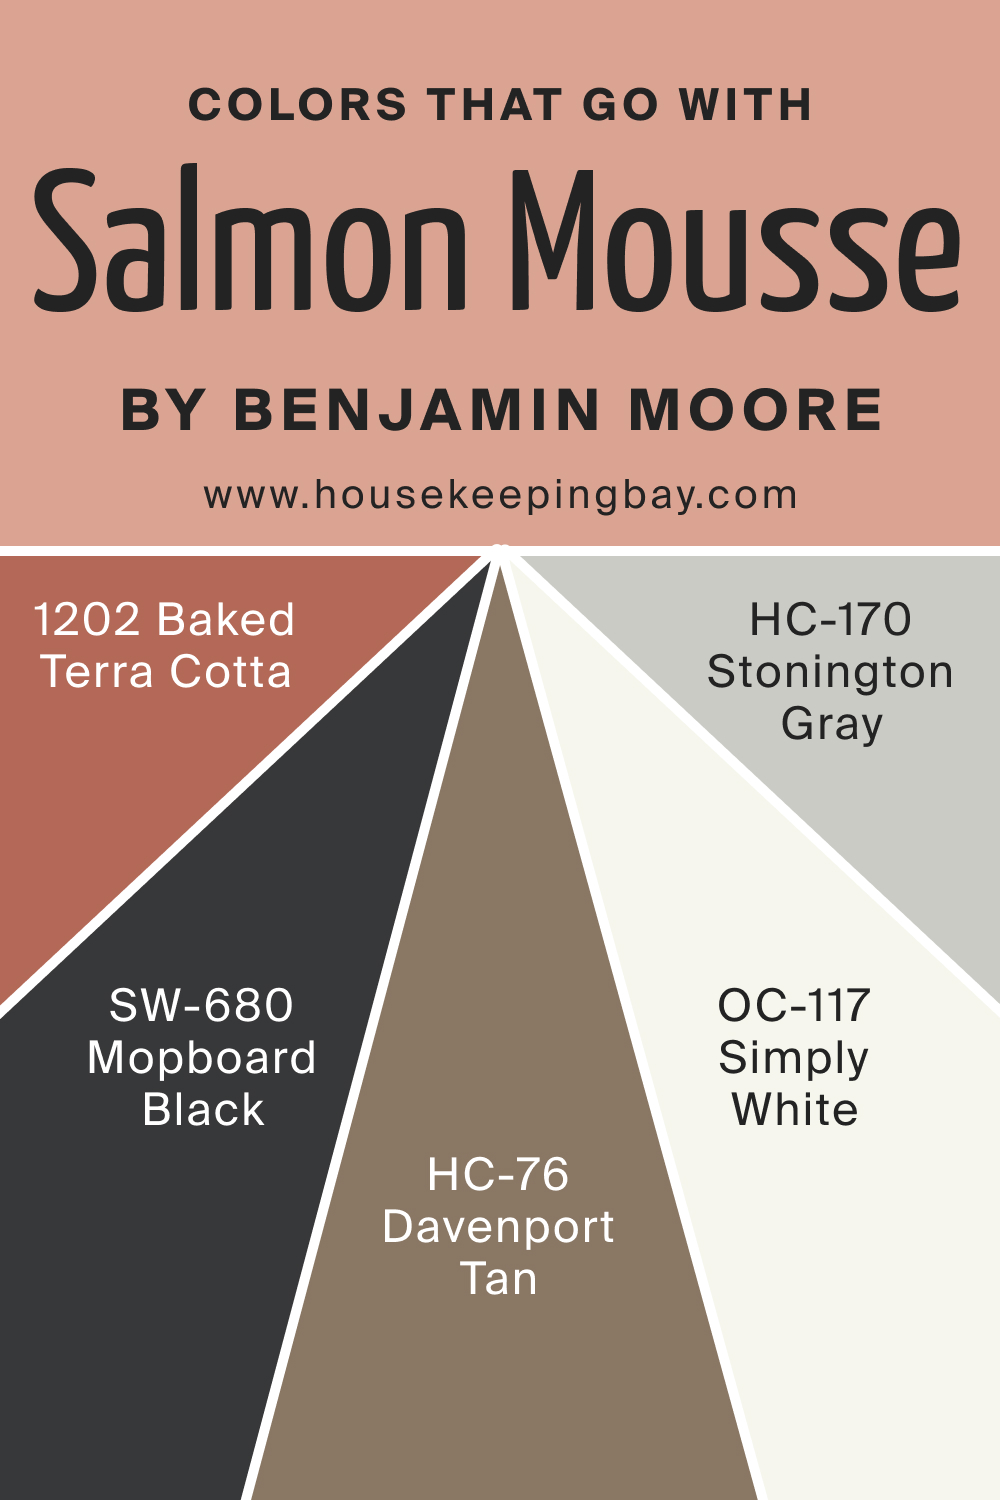 Colors that go with BM Salmon Mousse 046 by Benjamin Moore